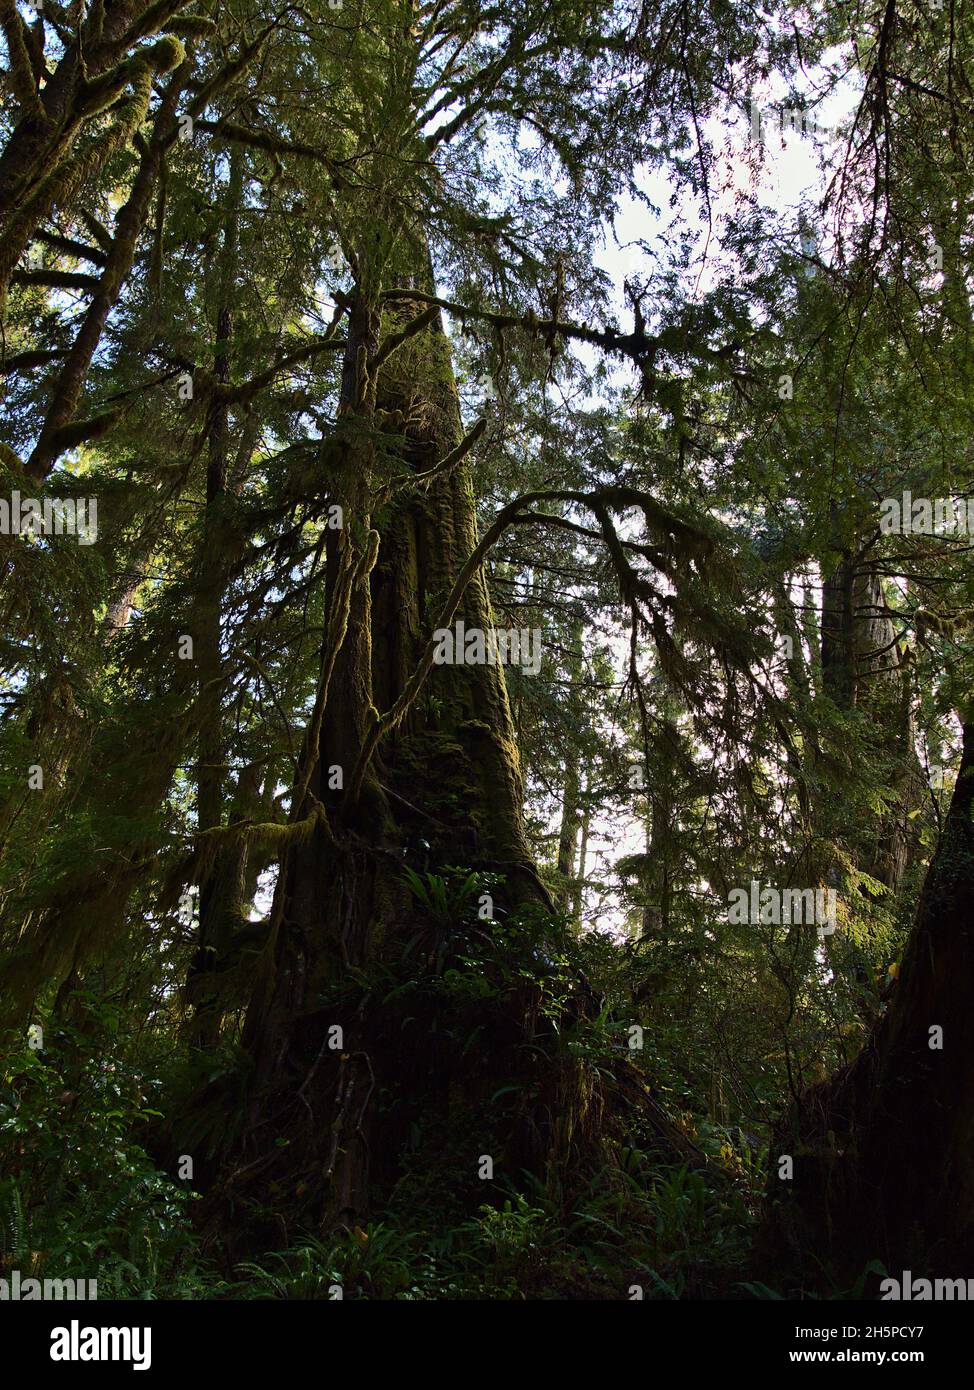 Low angle portrait view of huge western red cedar tree (Thuja plicata) with moss-covered trunk in temperate rainforest on Vancouver Island, Canada. Stock Photo